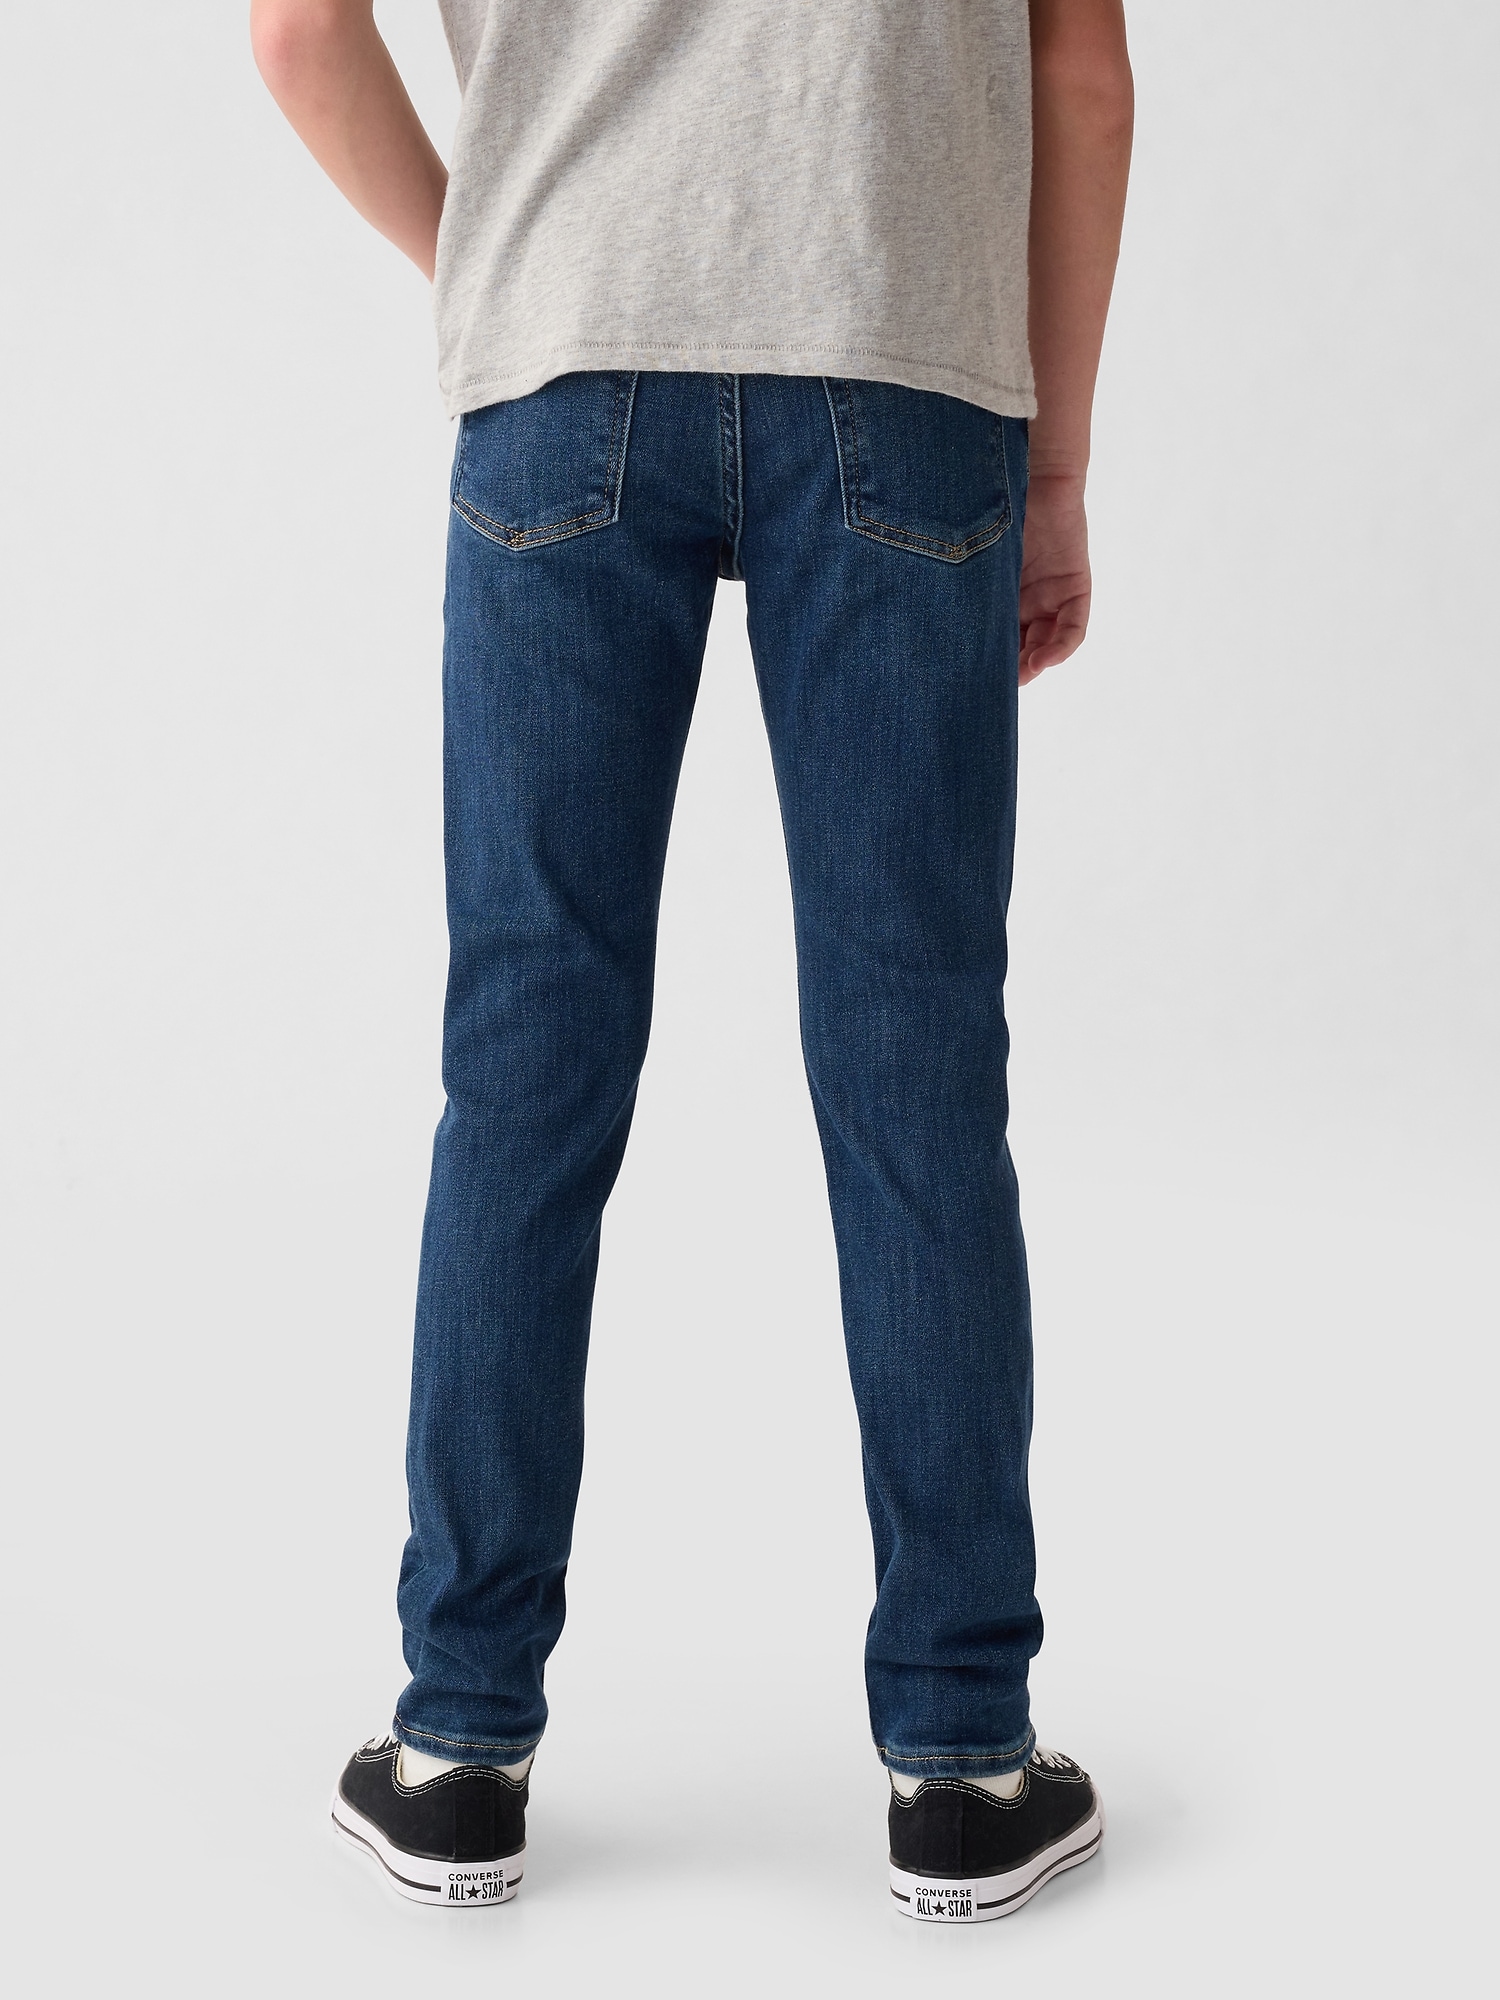 Skinny Fit Lined Jeans - Denim blue/Checked - Kids